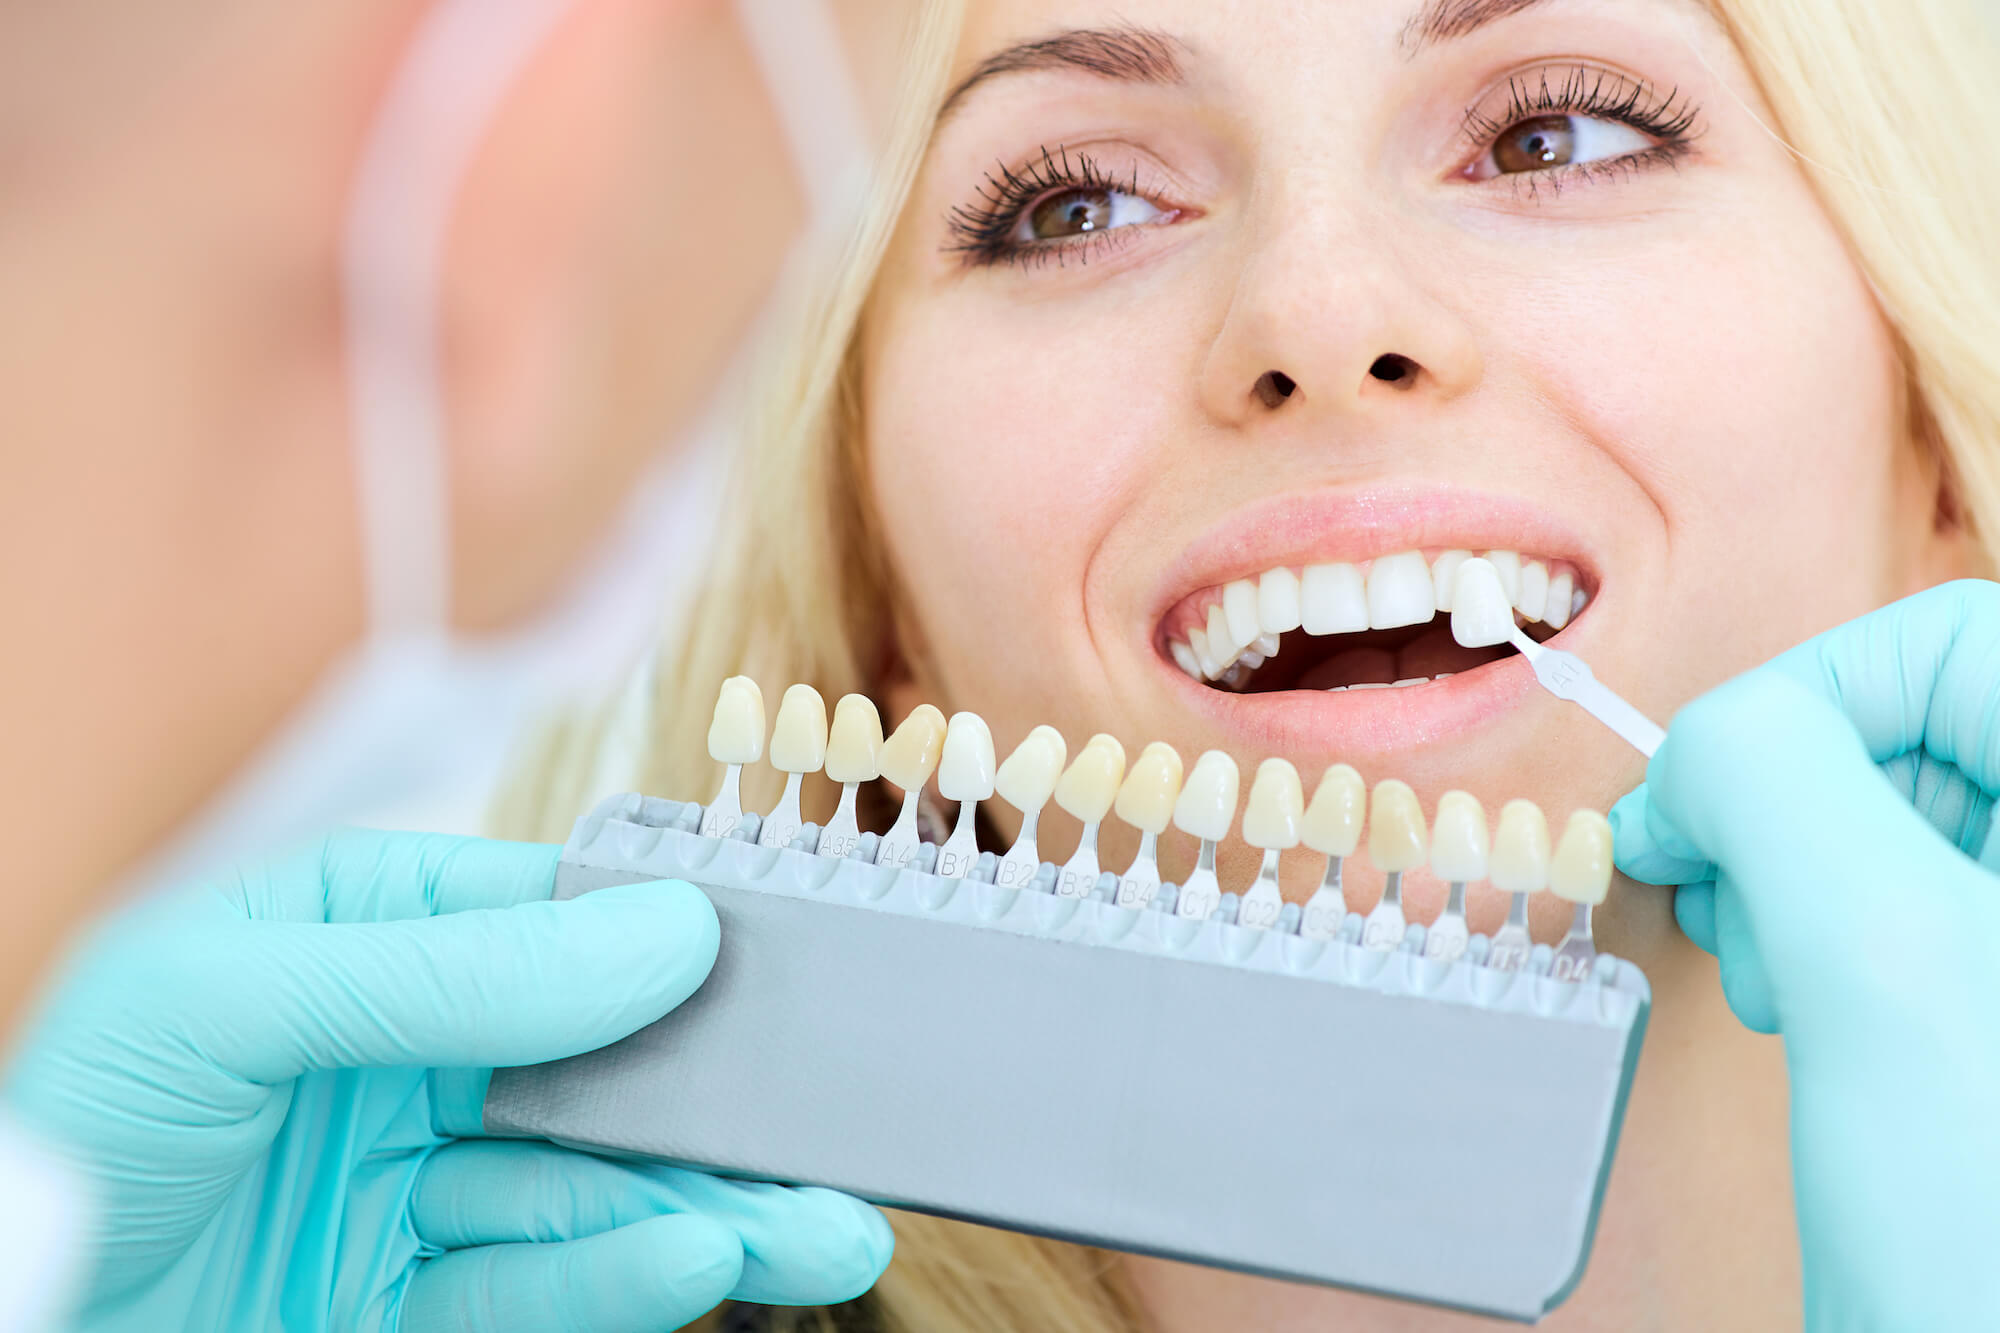 cosmetic-dentistry-dental-labs-beverly-hills-los-angeles